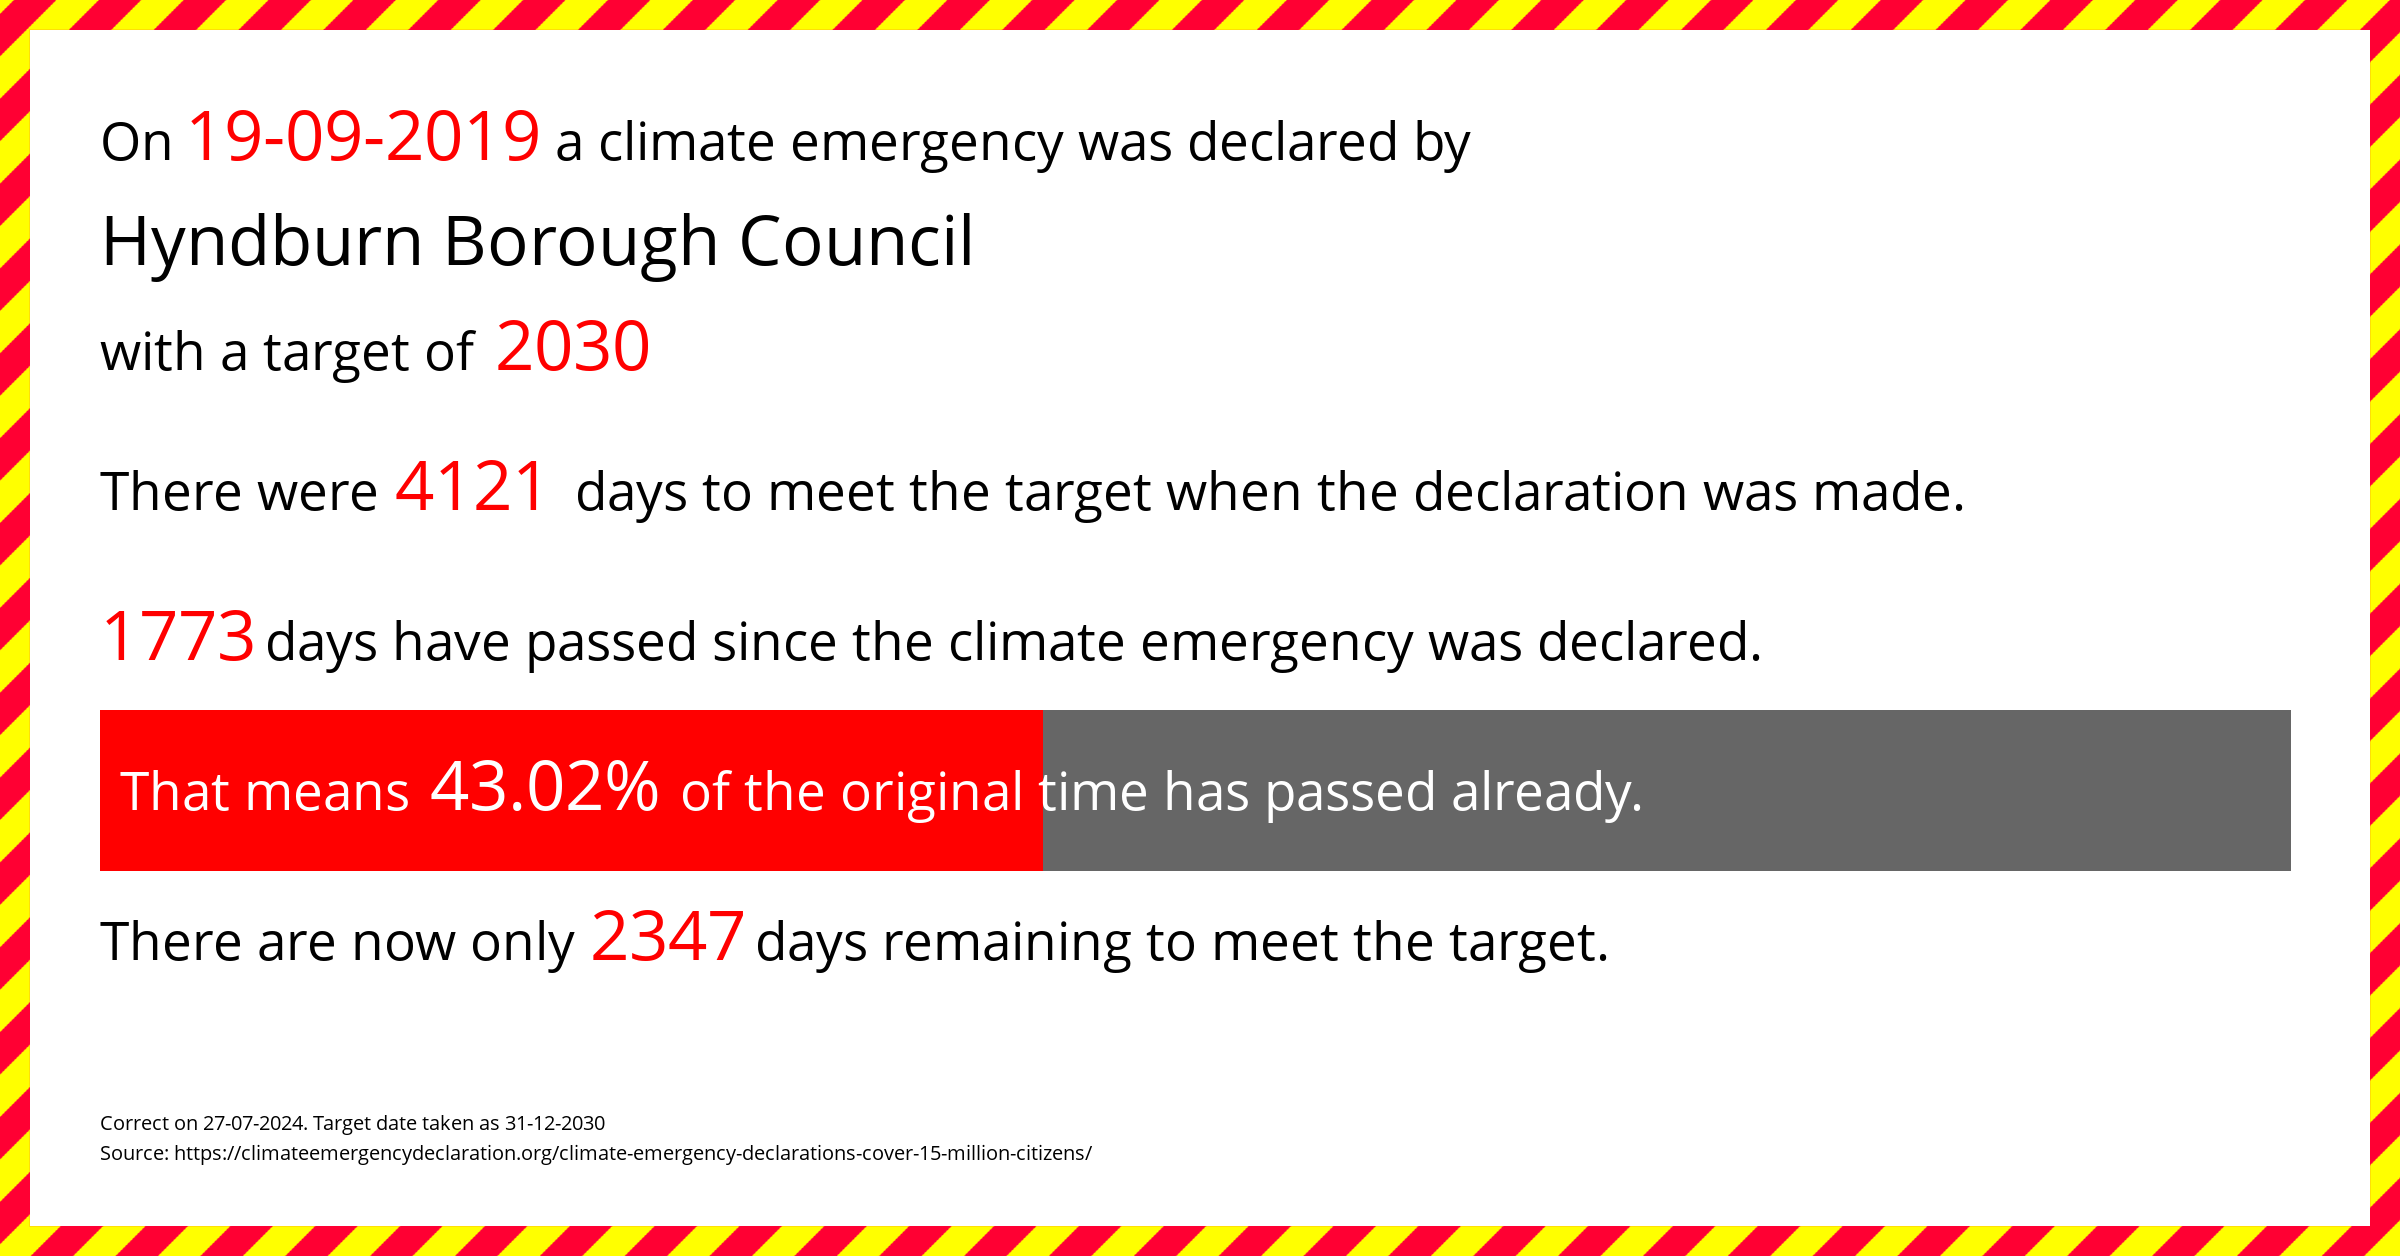 Hyndburn Borough Council declared a Climate emergency on Thursday 19th September 2019, with a target of 2030.